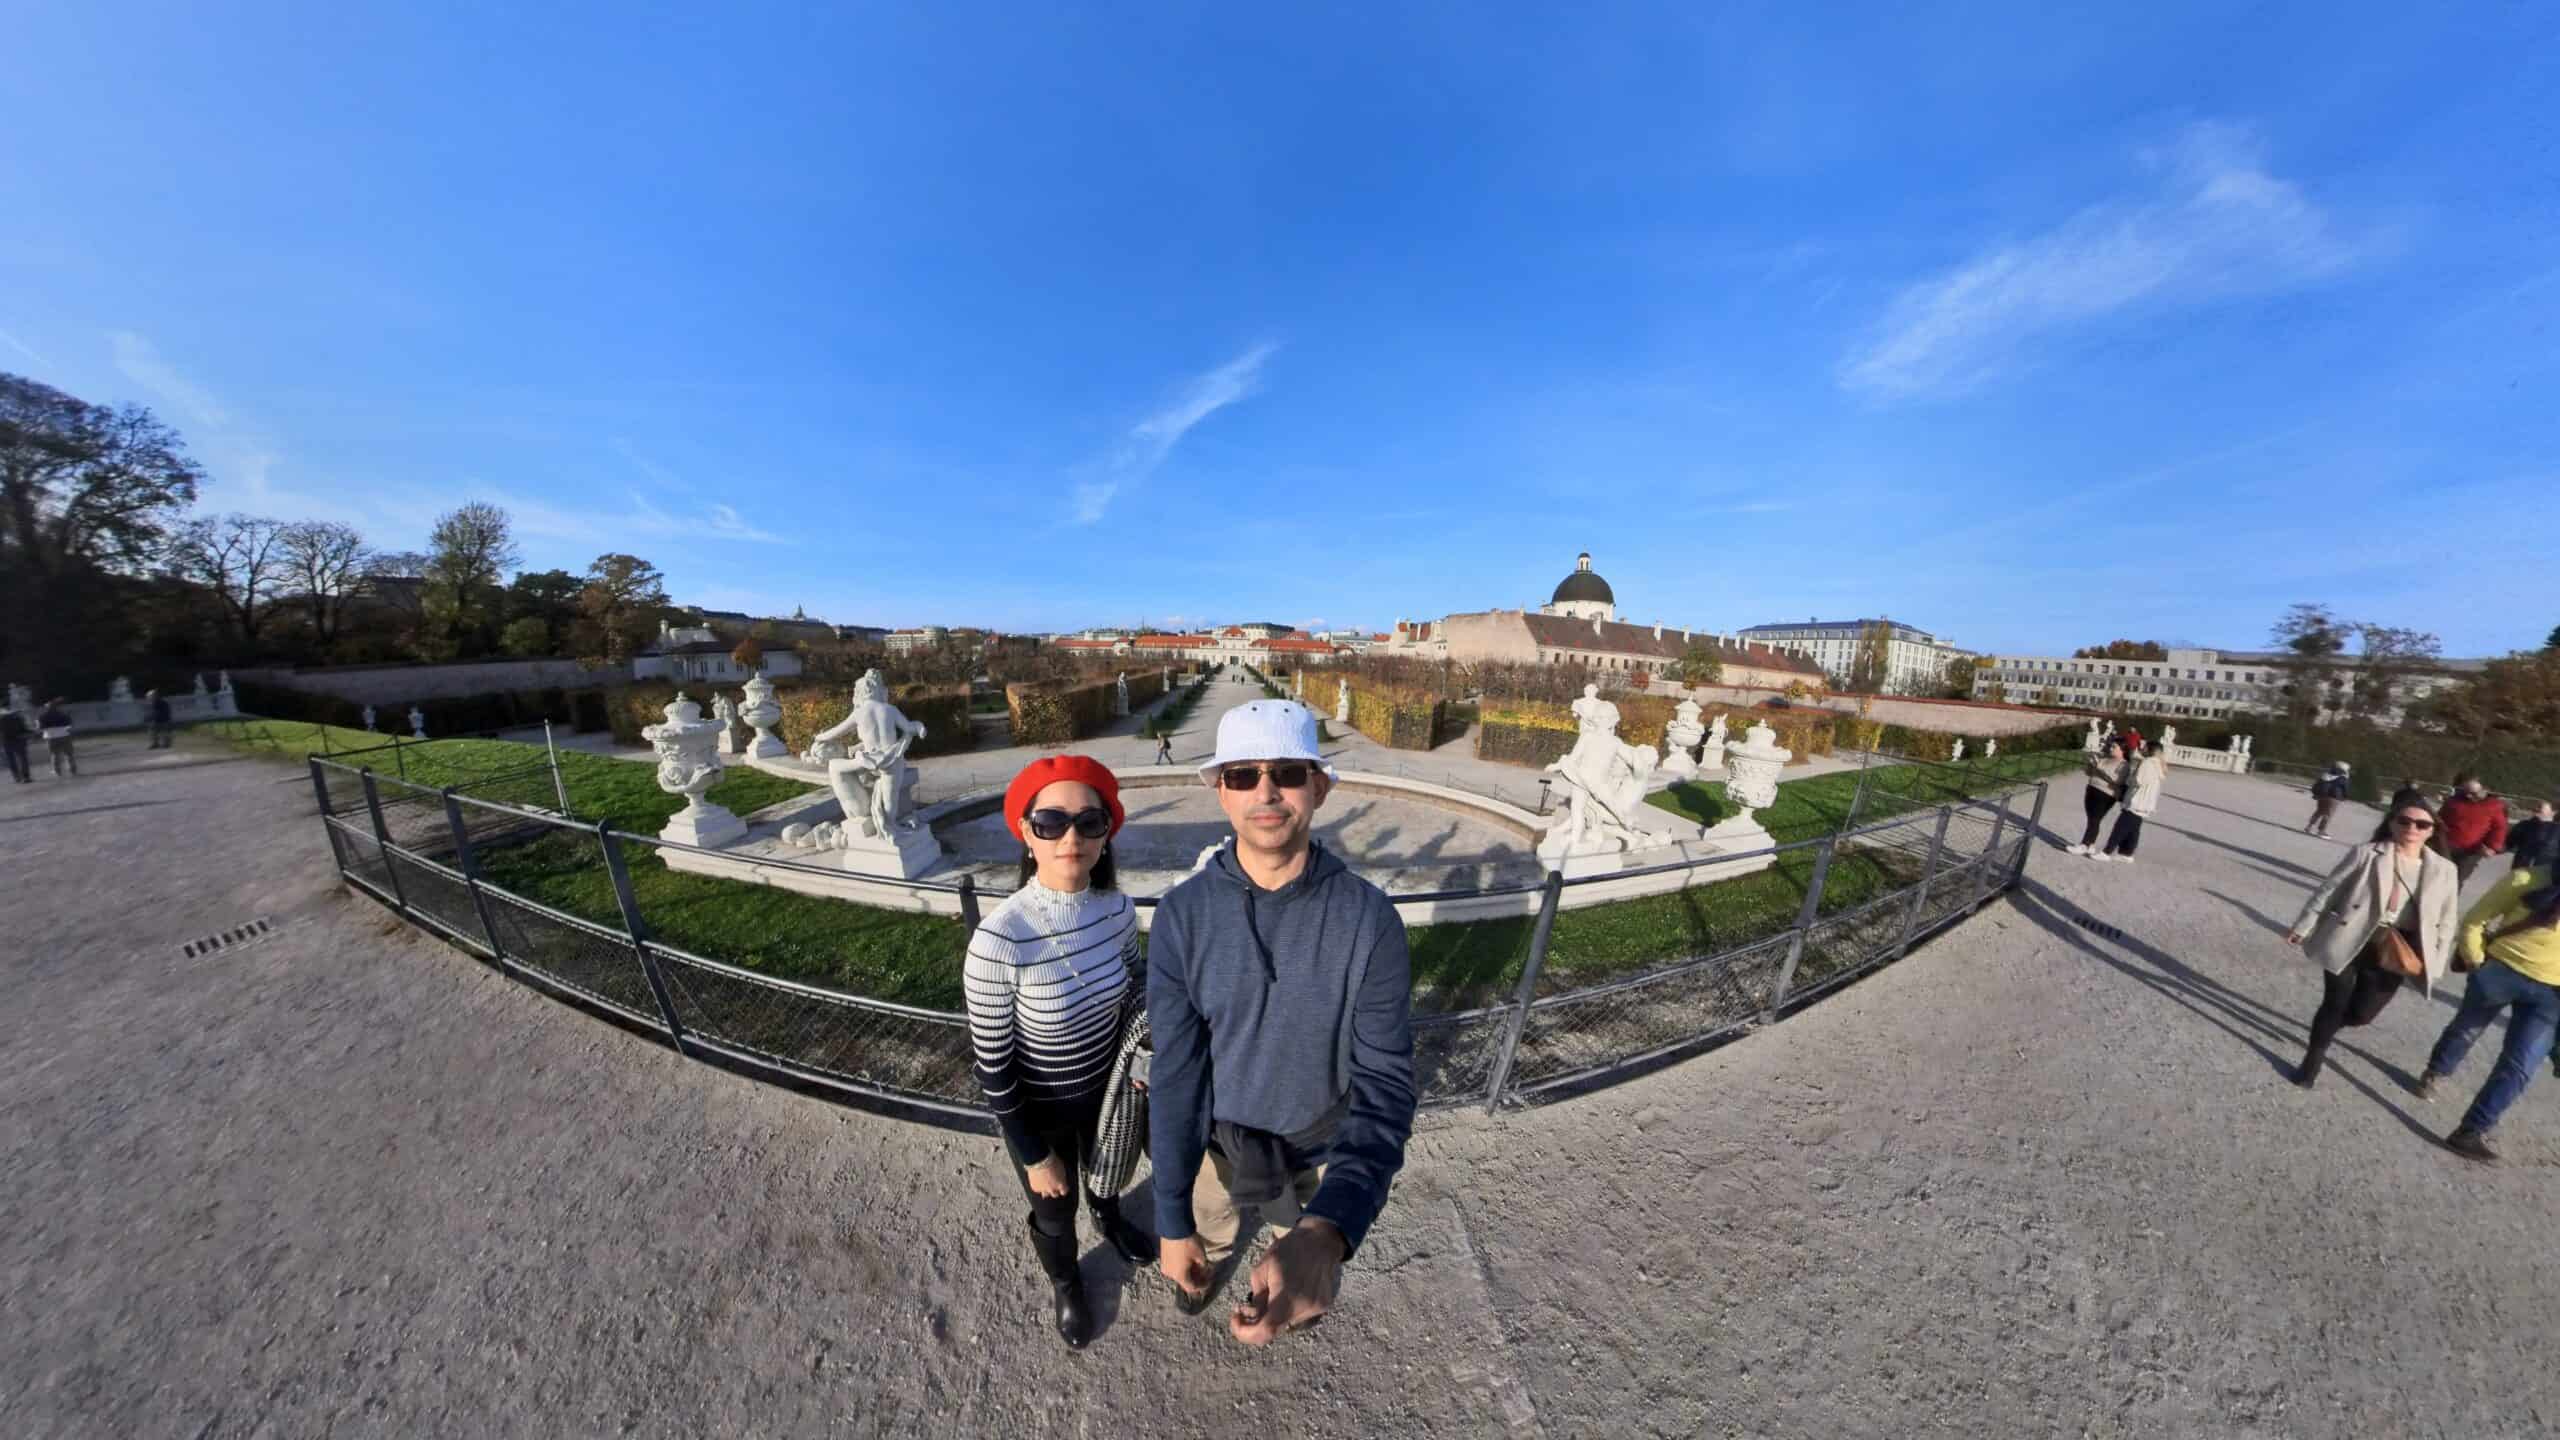 Belvedere Palace Gardens in Vienna taken with Insta360 camera with invisible selfie stick. floating camera effect.